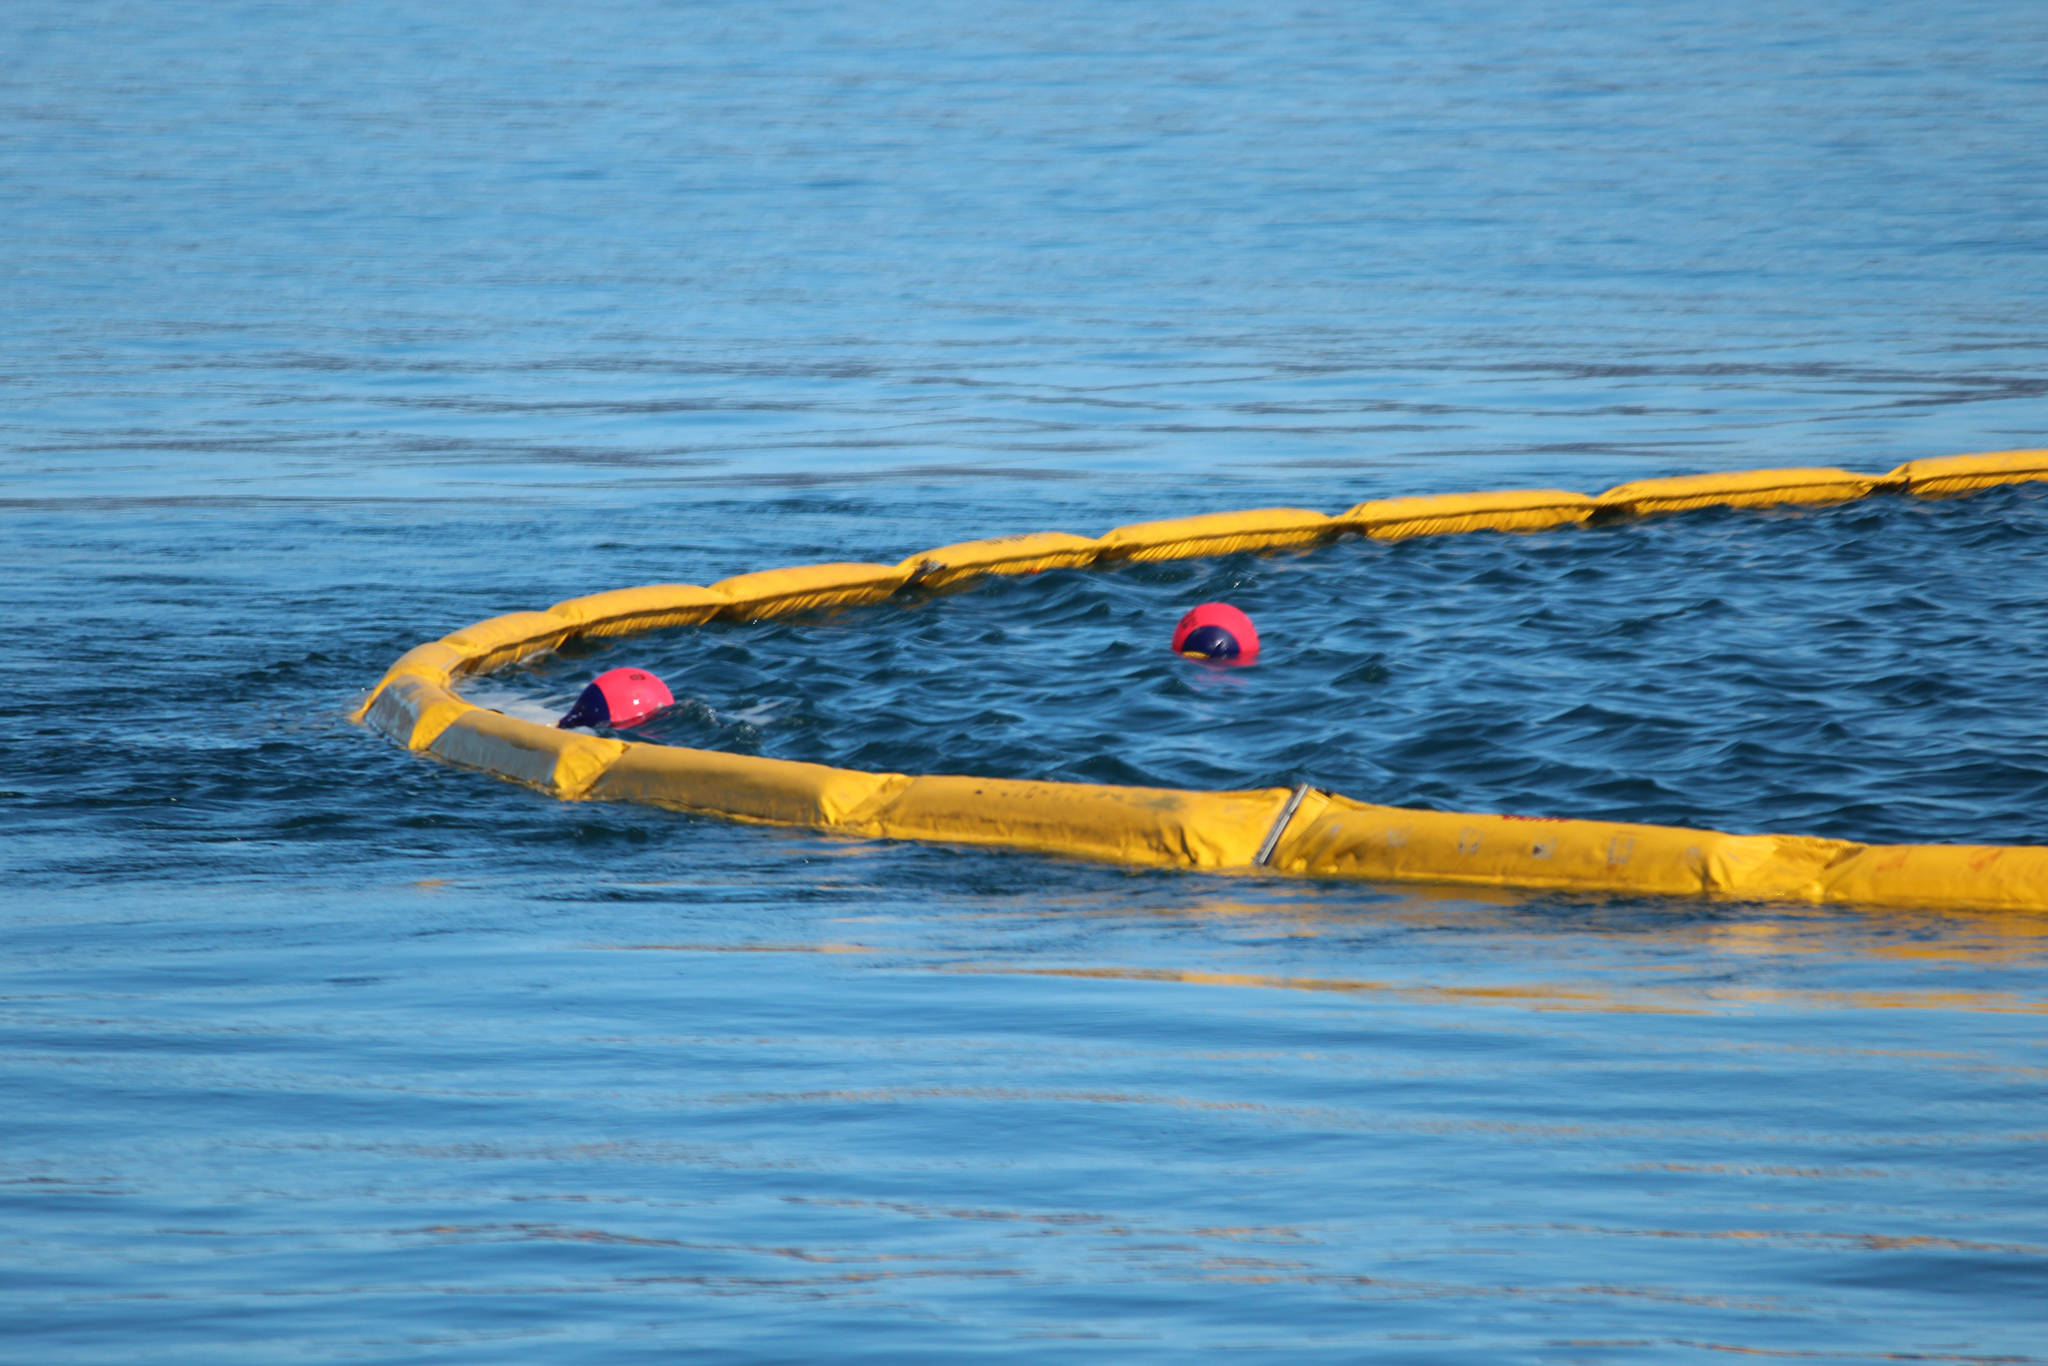 The apex of a boom holds two buoys placed in the water to simulate areas of oil slick fishing vessels needed to aim for during annual oil spill response training held Saturday, April 14, 2018 in Homer, Alaska. (Homer News file photo)